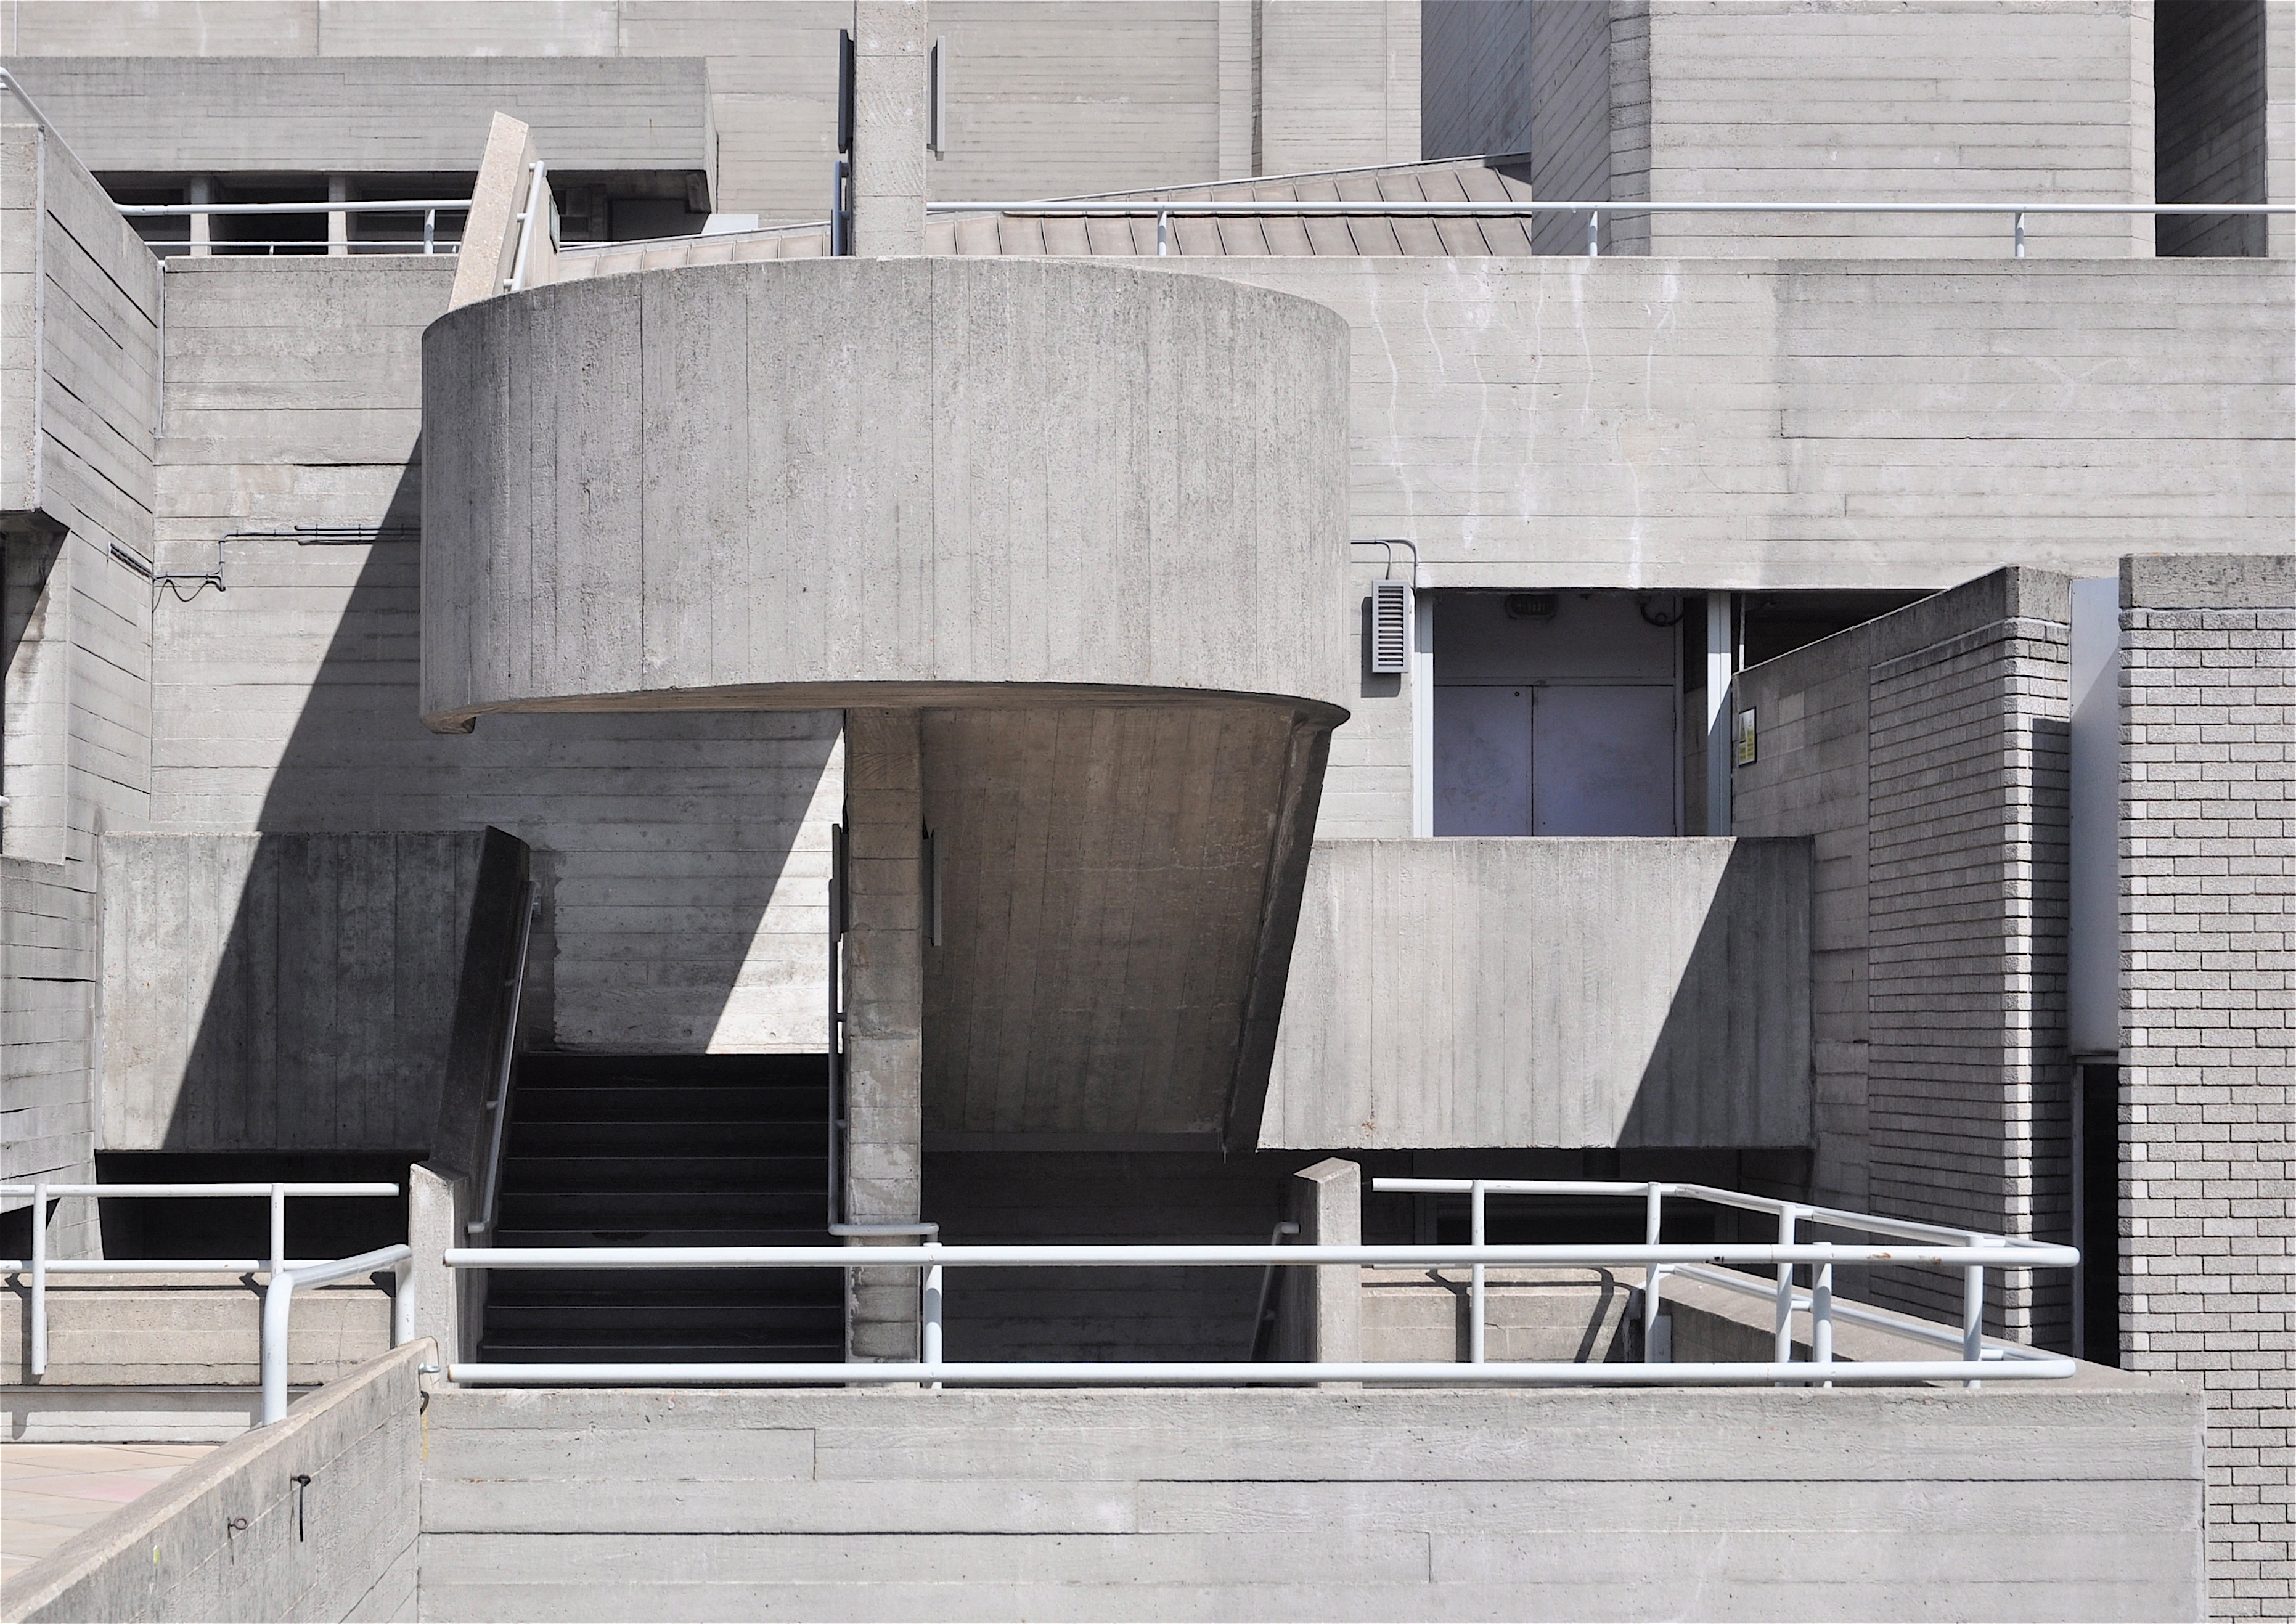 An example of brutalist architecture